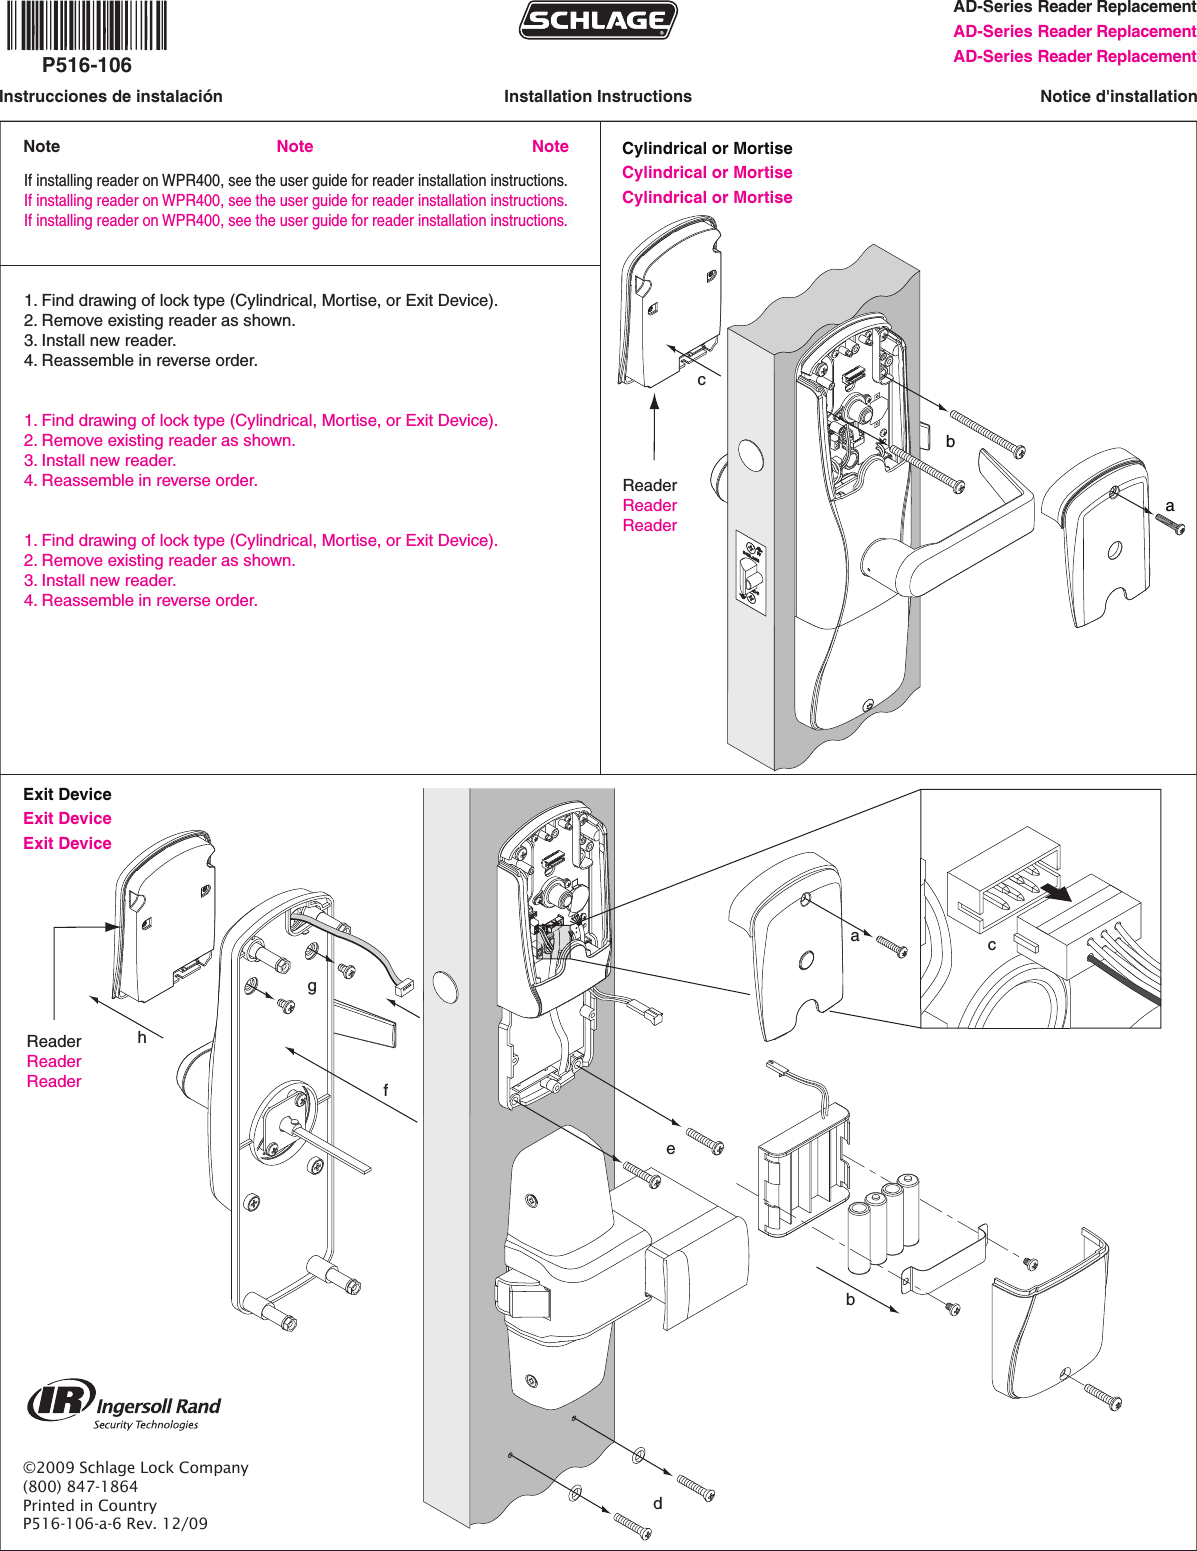 AD-Series Reader ReplacementAD-Series Reader Replacement AD-Series Reader ReplacementInstallation InstructionsInstrucciones de instalación Notice d&apos;installationCylindrical or MortiseCylindrical or Mortise Cylindrical or Mortise     abc          If installing reader on WPR400, see the user guide for reader installation instructions.If installing reader on WPR400, see the user guide for reader installation instructions.If installing reader on WPR400, see the user guide for reader installation instructions.1. Find drawing of lock type (Cylindrical, Mortise, or Exit Device).2. Remove existing reader as shown.3. Install new reader.4. Reassemble in reverse order. 1. Find drawing of lock type (Cylindrical, Mortise, or Exit Device).2. Remove existing reader as shown.3. Install new reader.4. Reassemble in reverse order. 1. Find drawing of lock type (Cylindrical, Mortise, or Exit Device).2. Remove existing reader as shown.3. Install new reader.4. Reassemble in reverse order.     P516-106©2009 Schlage Lock Company(800) 847-1864Printed in CountryP516-106-a-6 Rev. 12/09abdefghReaderReaderReader        Exit Device Exit Device  Exit Device      ReaderReaderReader        cNoteNote Note